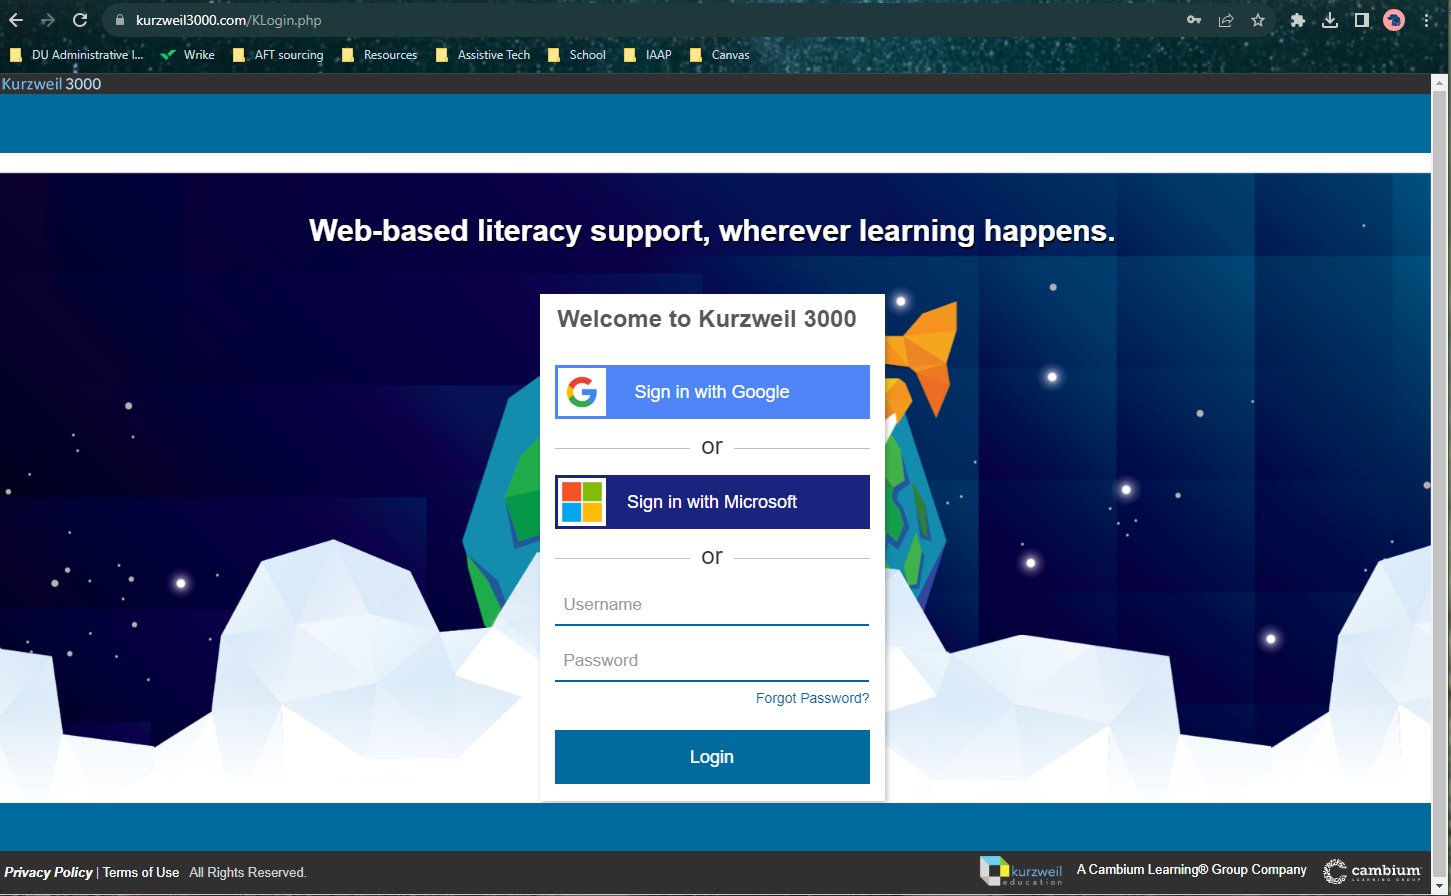 the Kurzweil log in page. There is a button that says "Sign in with Microsoft"